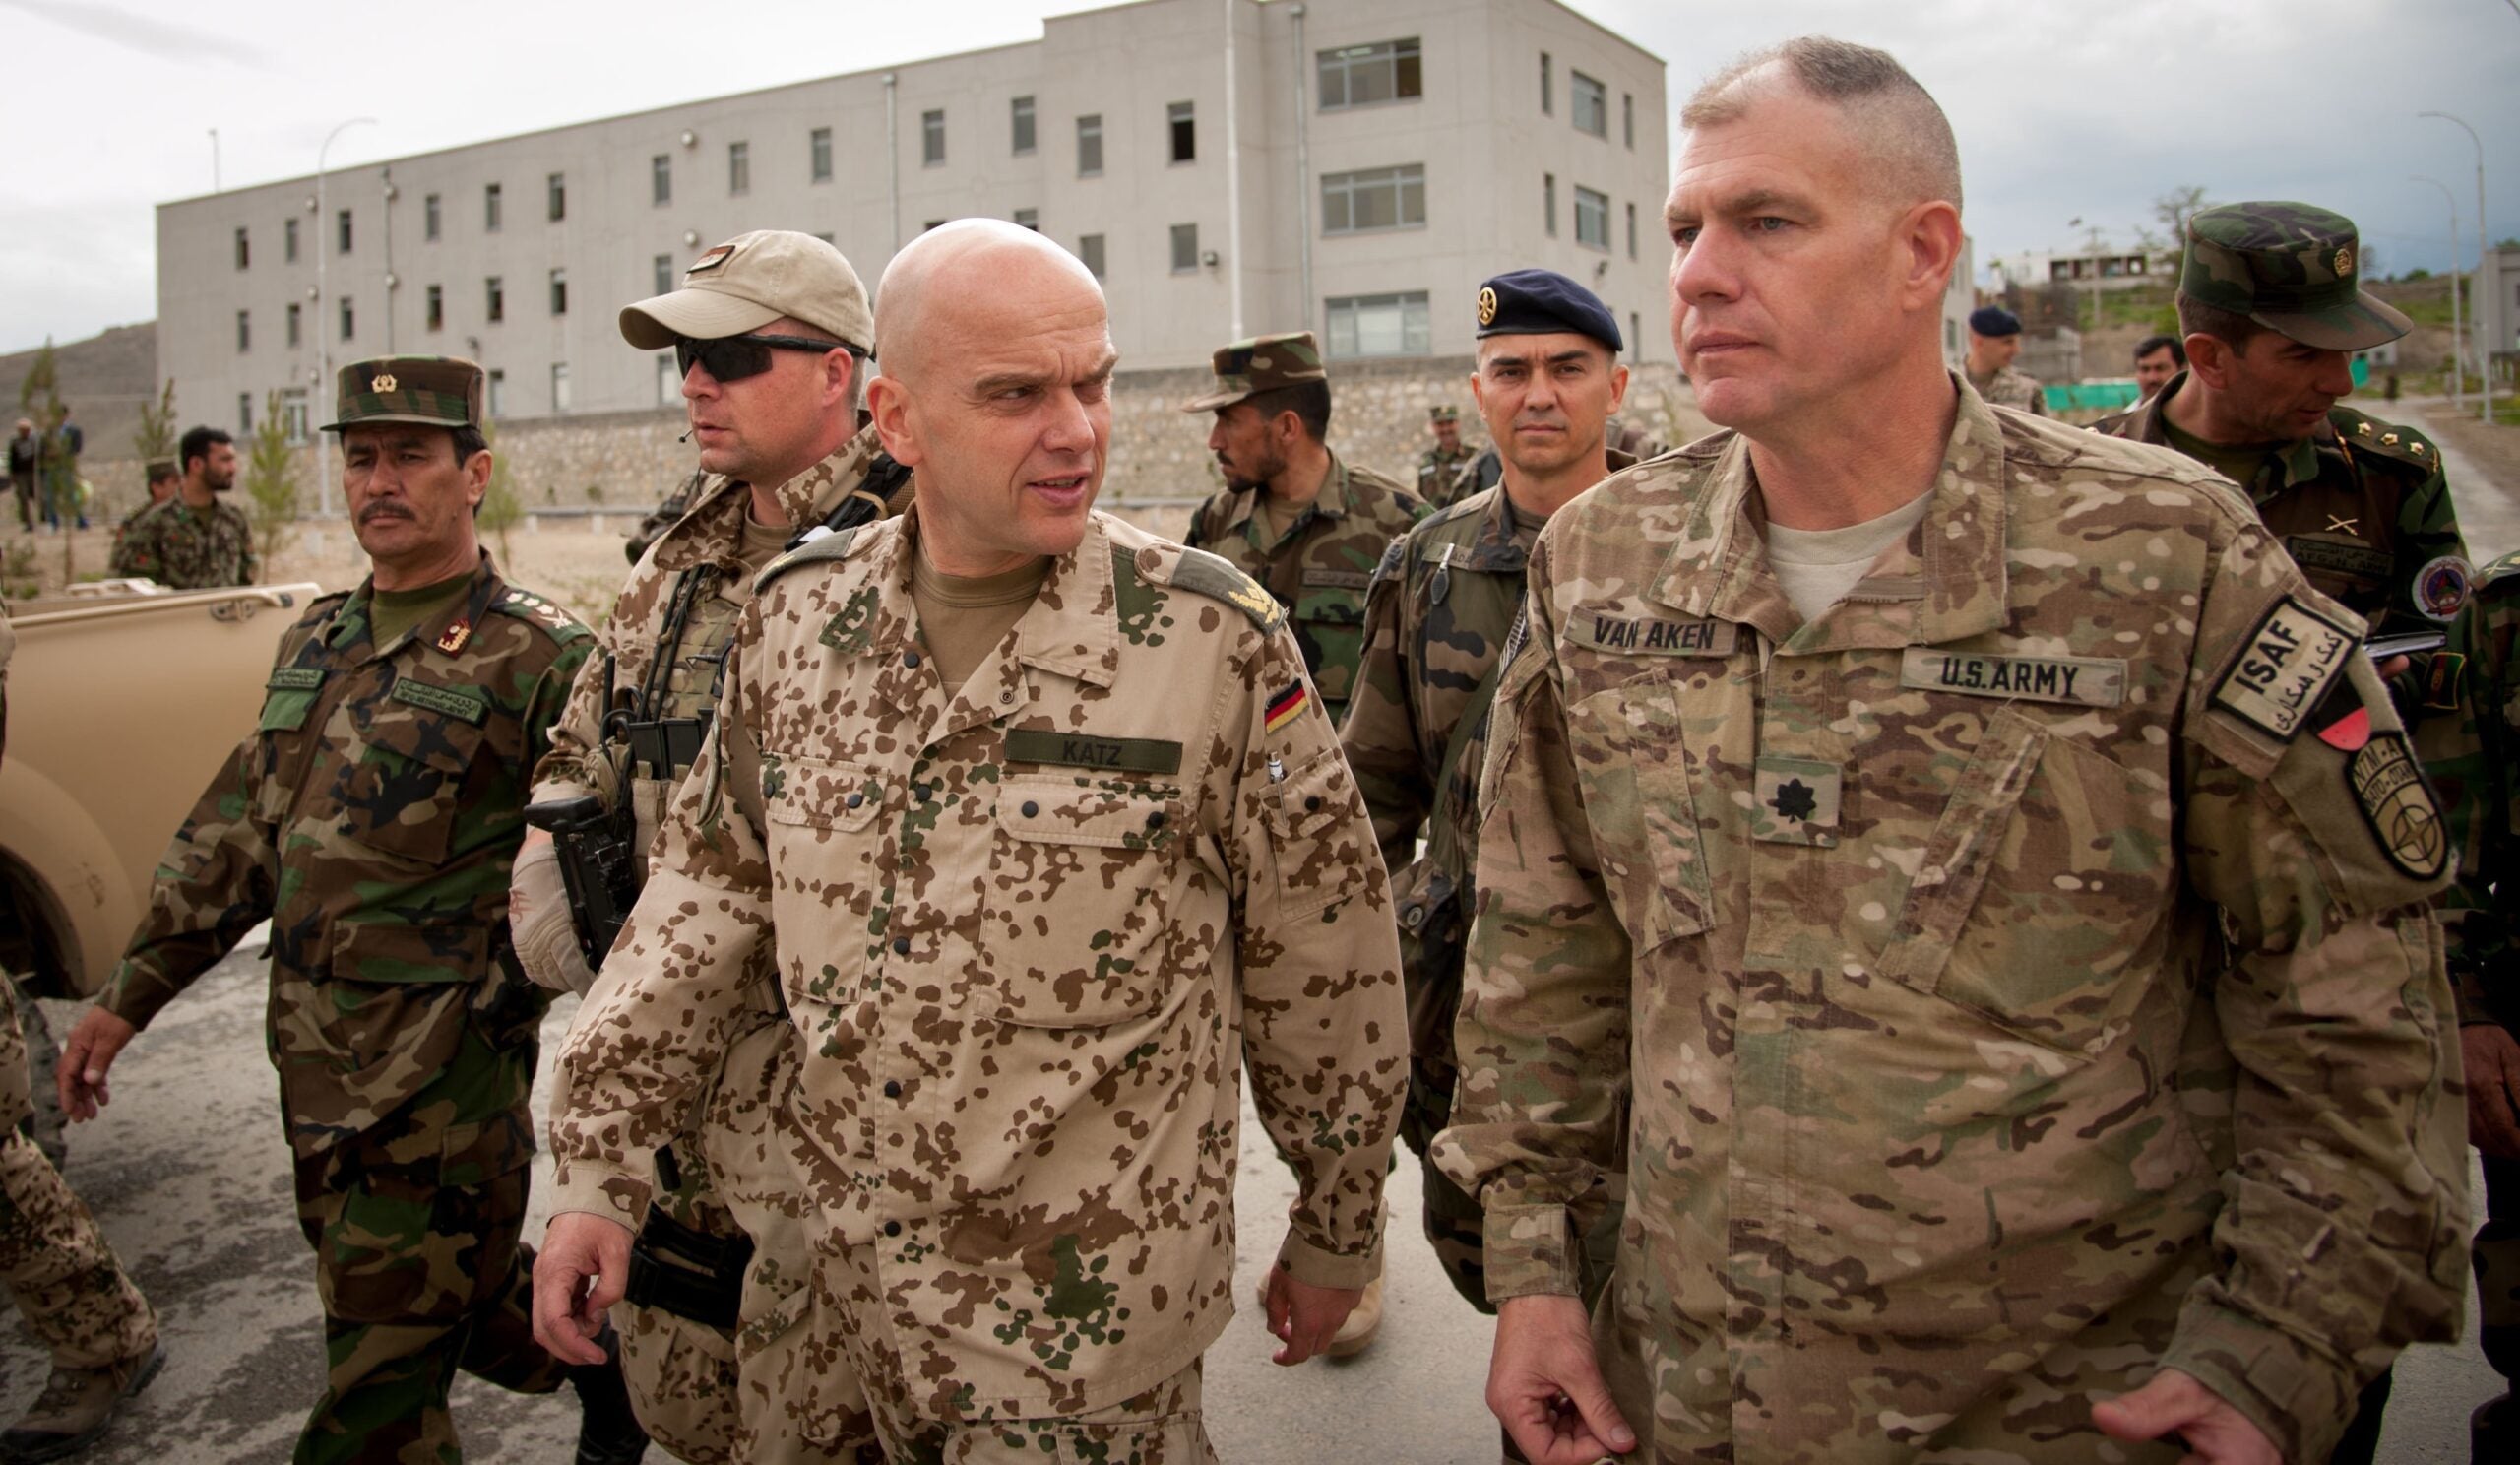 U.S. Army Lt. Col. John Van Aken, front right, accompanies German air force Brig. Gen. Gunter Katz on a walking tour around the Afghan National Defense University (ANDU) in Kabul, Afghanistan, May 7, 2013. The ANDU trained future Afghan National Army officers. (U.S. Air Force photo by Staff Sgt. Dustin Payne/Released)